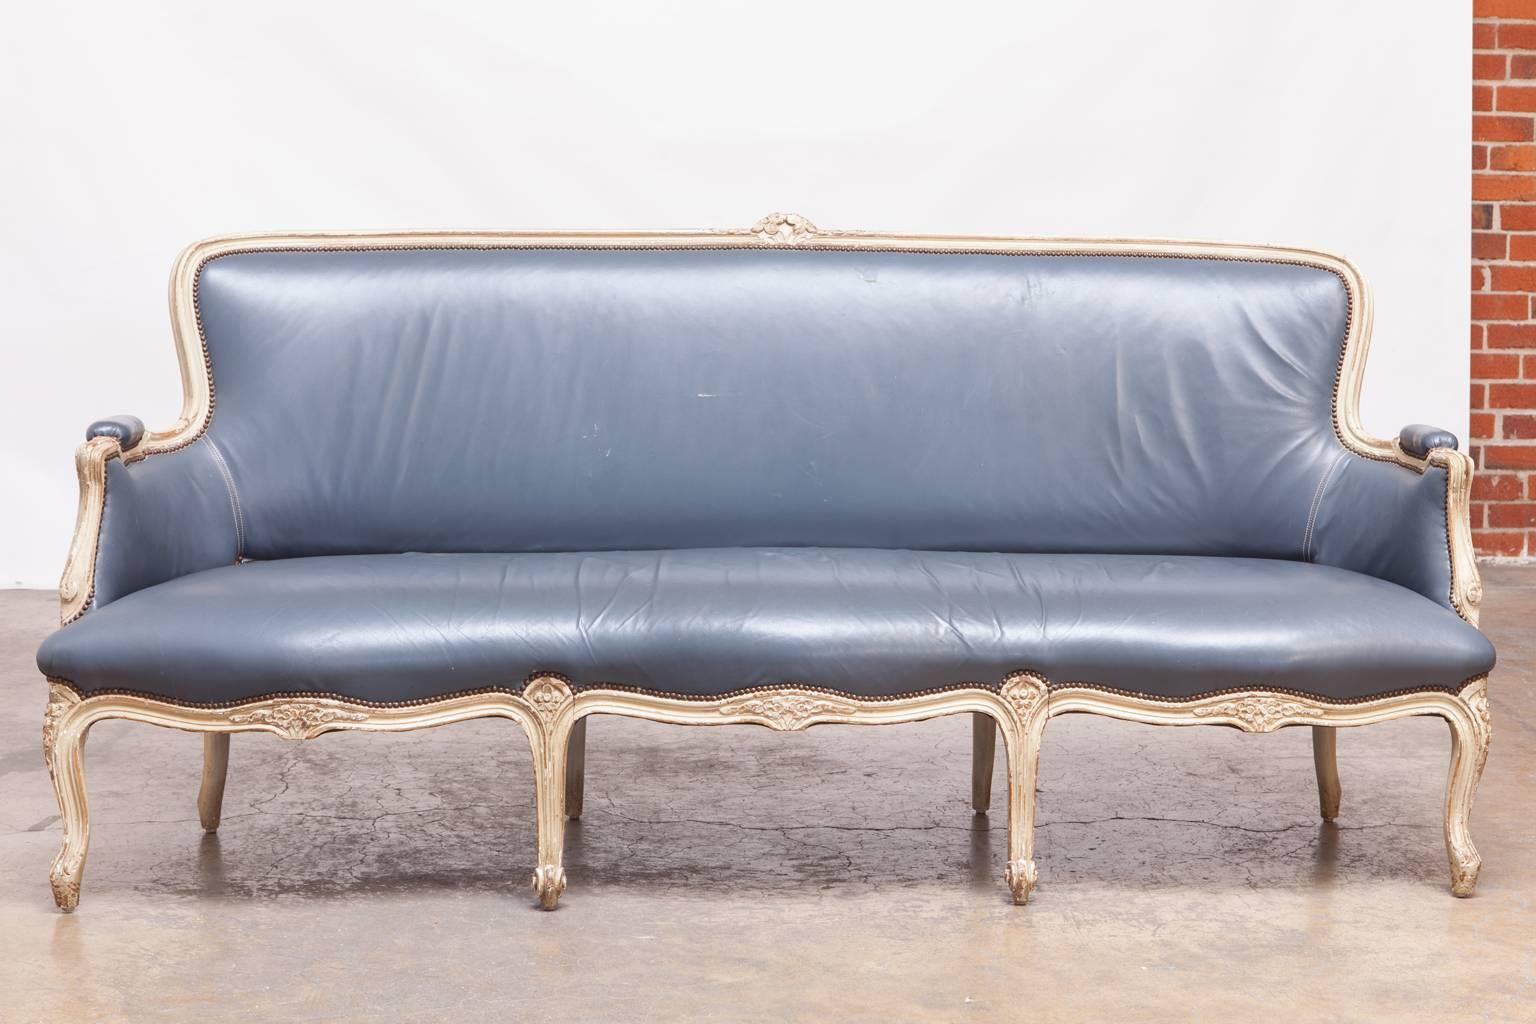 Stunning Louis XV style canapé sofa upholstered for William Gaylord in a French blue leather. Lovely painted frame with a distressed finish and accented by brass nail head trim. Rare serpentine seat supported by eight cabriole legs in the front and